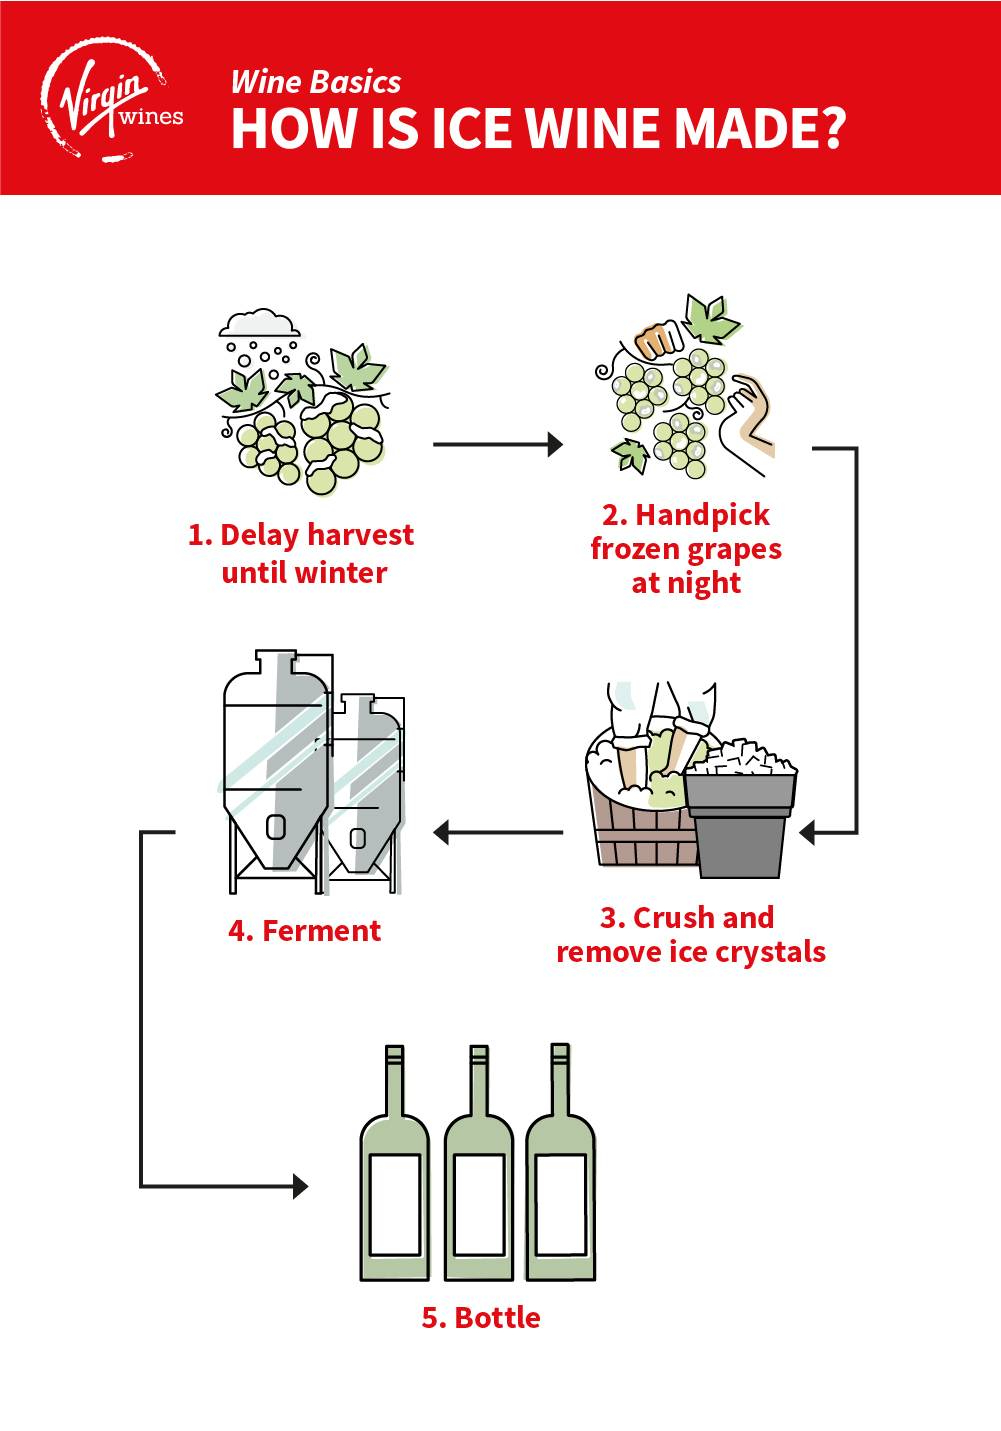 Infographic by Virgin Wines showing how ice wine is made